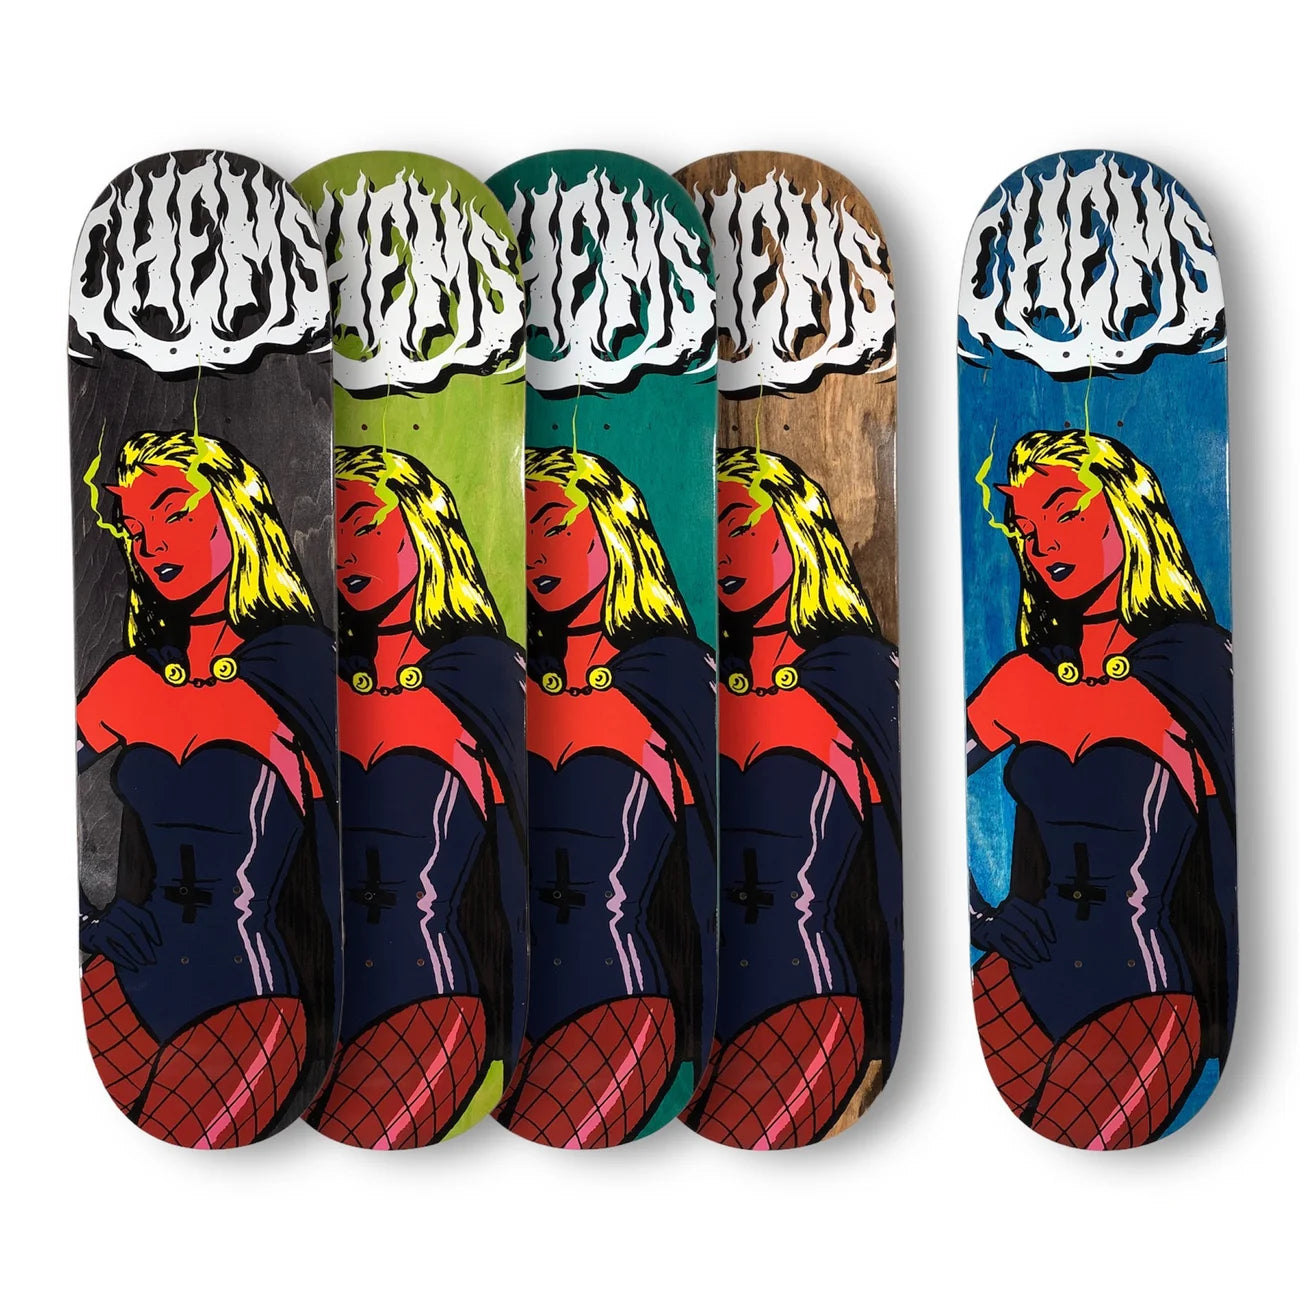 Chems Devil Girl Skateboard Deck; Features a white Chems logo at the top; Depicts a devil woman with blonde hair; Available in various background colors; Eye-catching and unique design for a bold and distinctive skateboard setup; Durable construction for reliable performance.